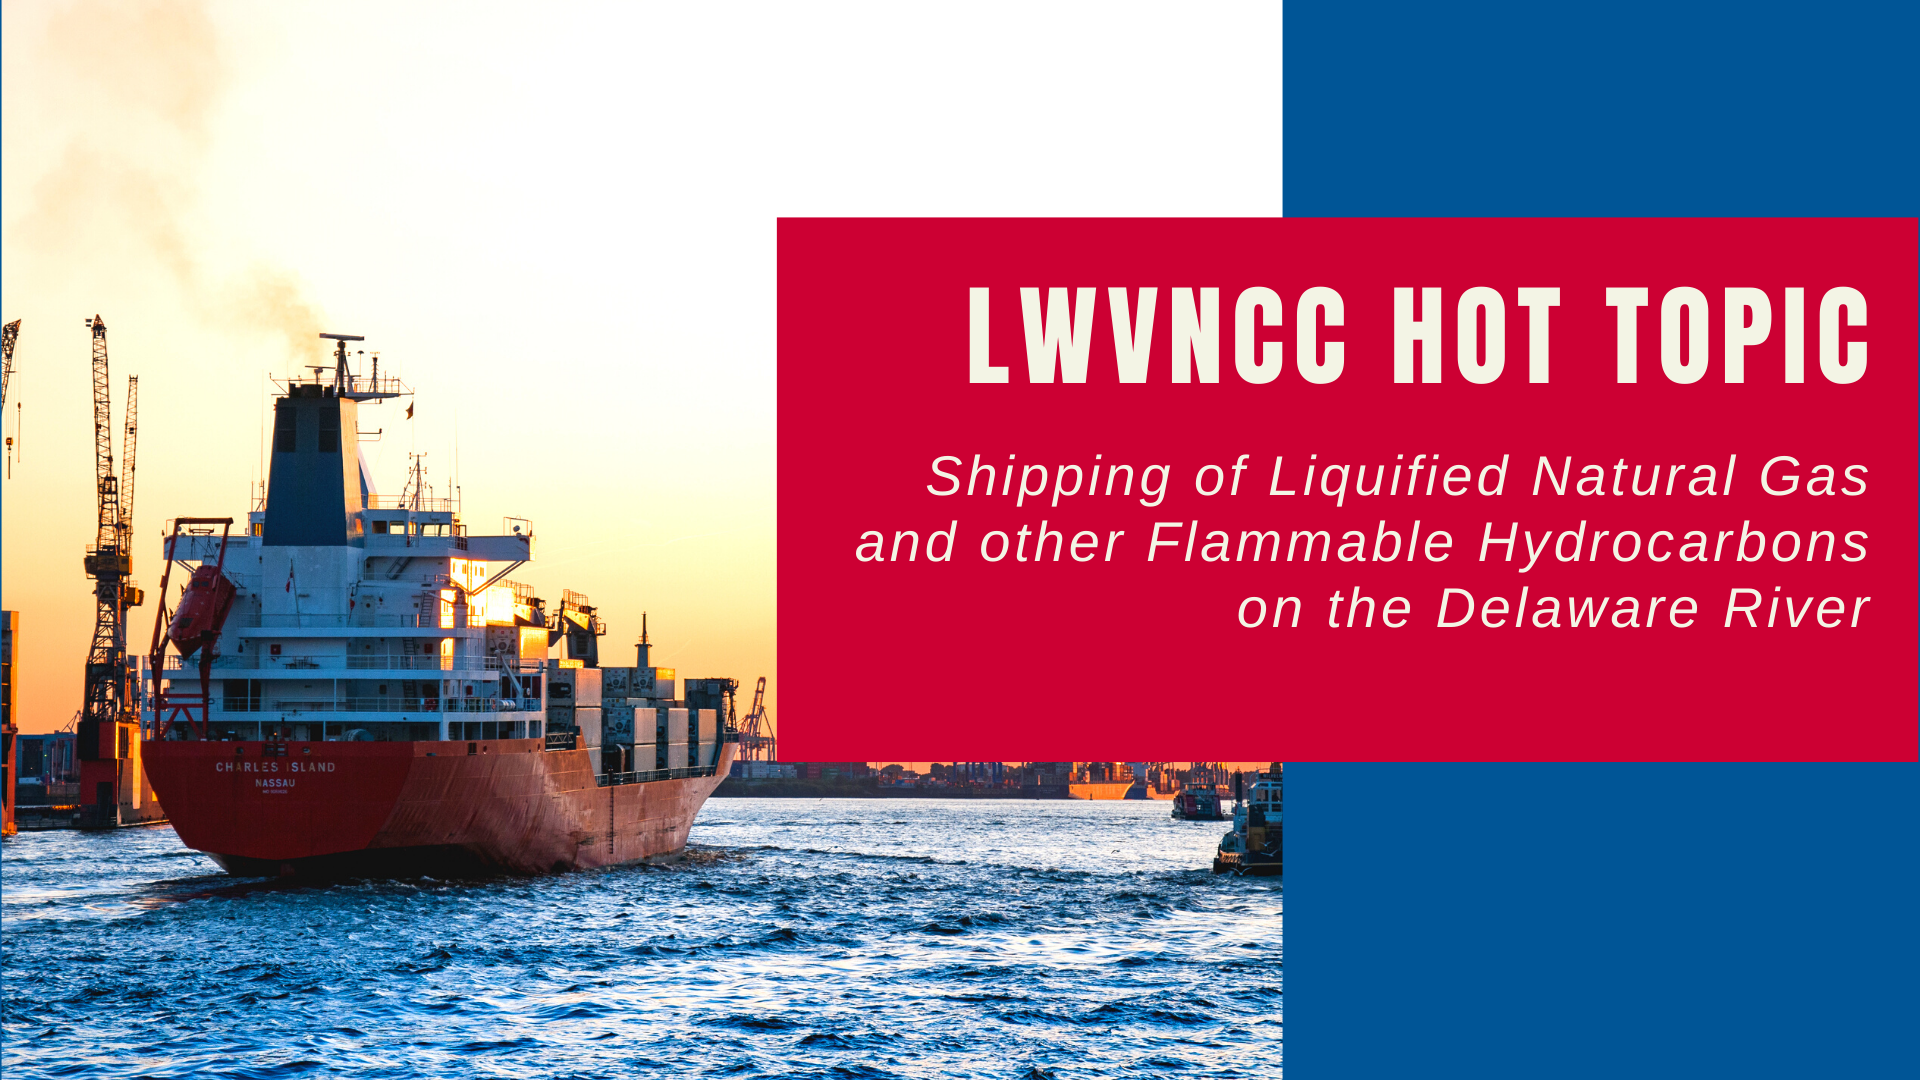 LWVNCC Hot Topic - Shipping of Liquified Natural Gas and other Flammable Hydrocarbons on the Delaware River